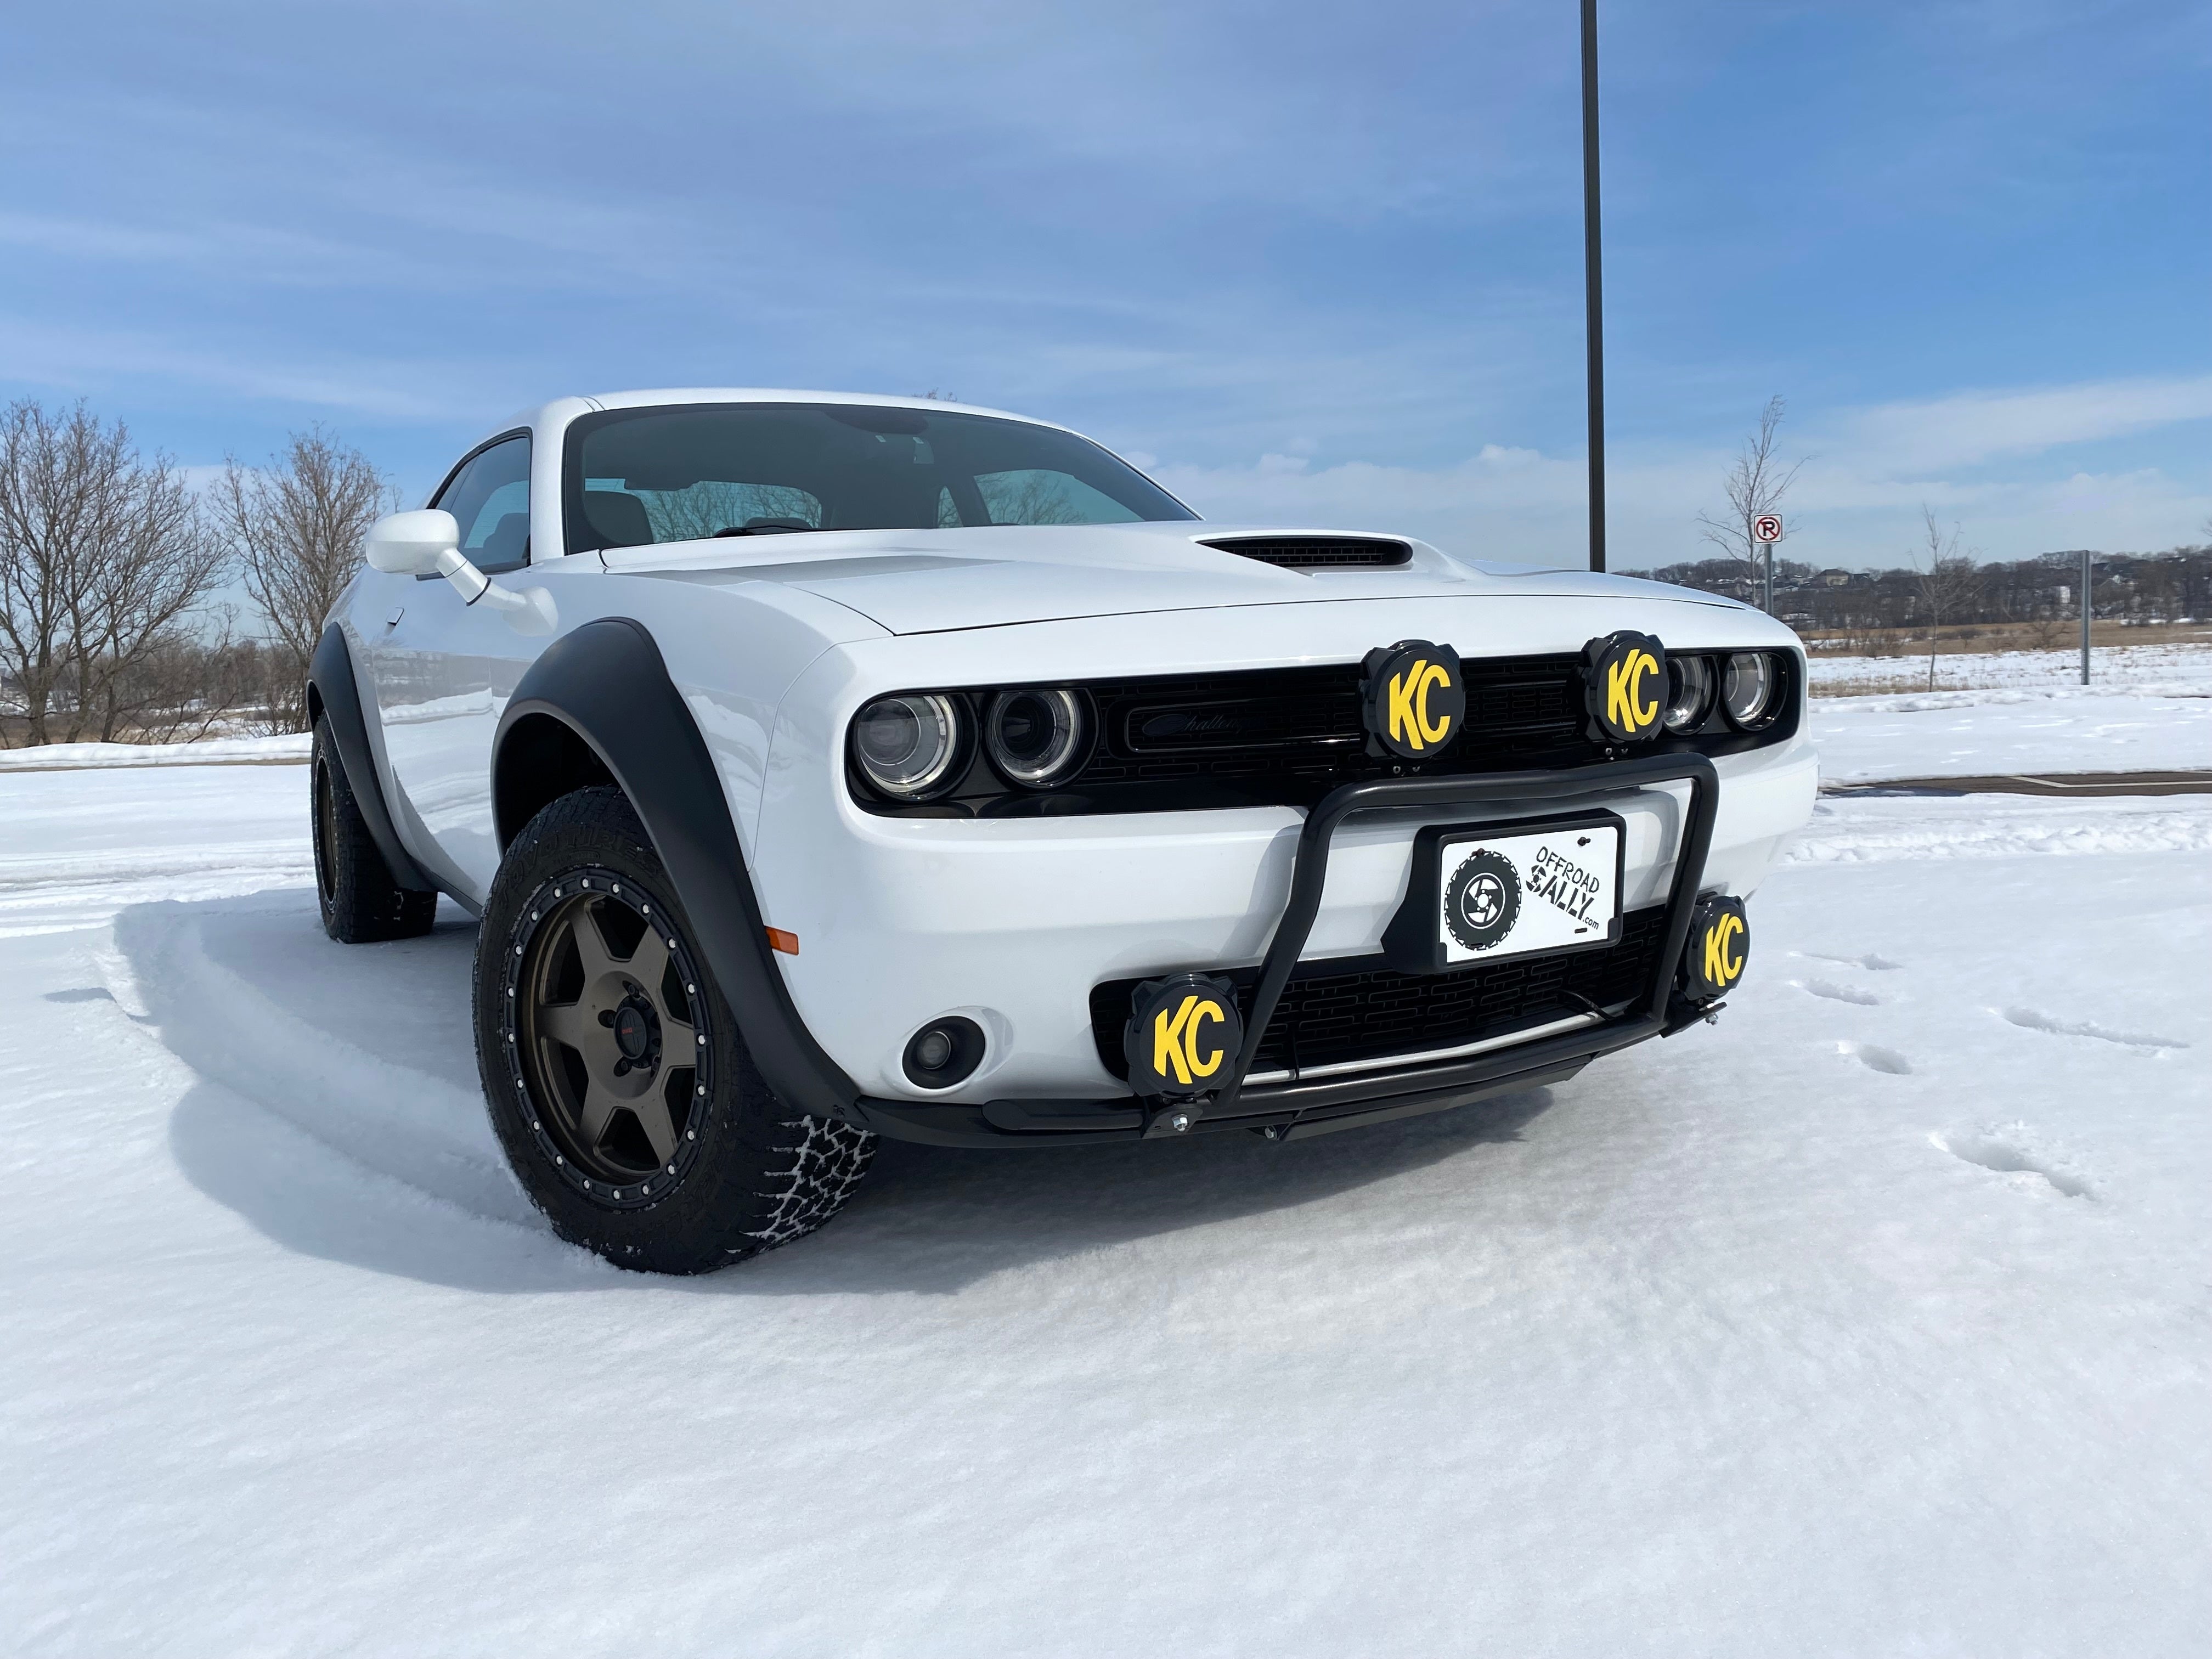 Off road Challenger with Bumper Bar and KC Hilites